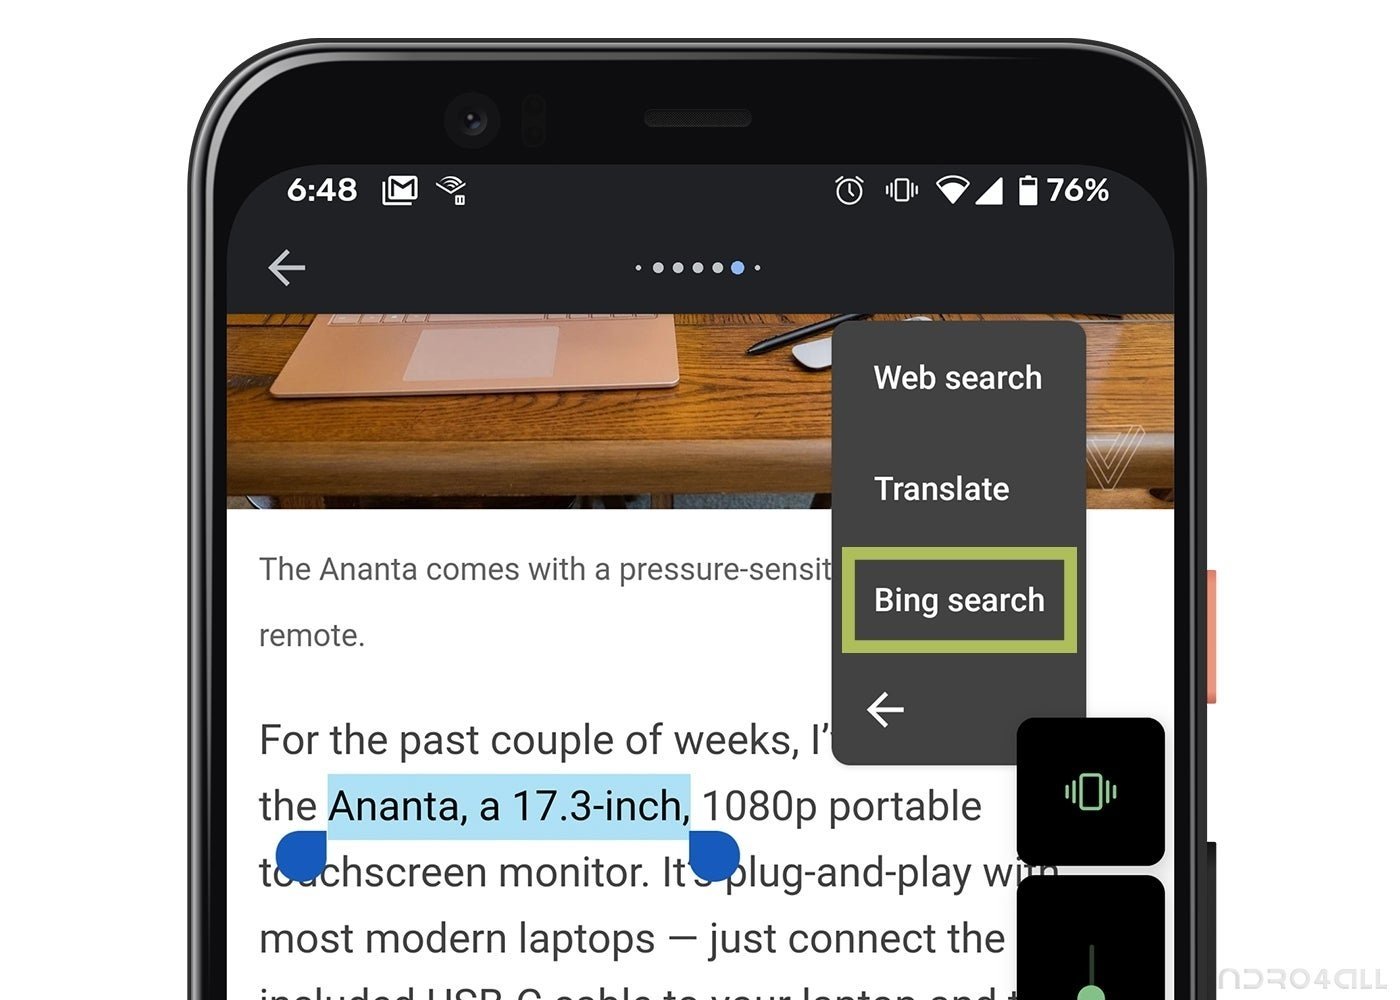 Bing search en Android